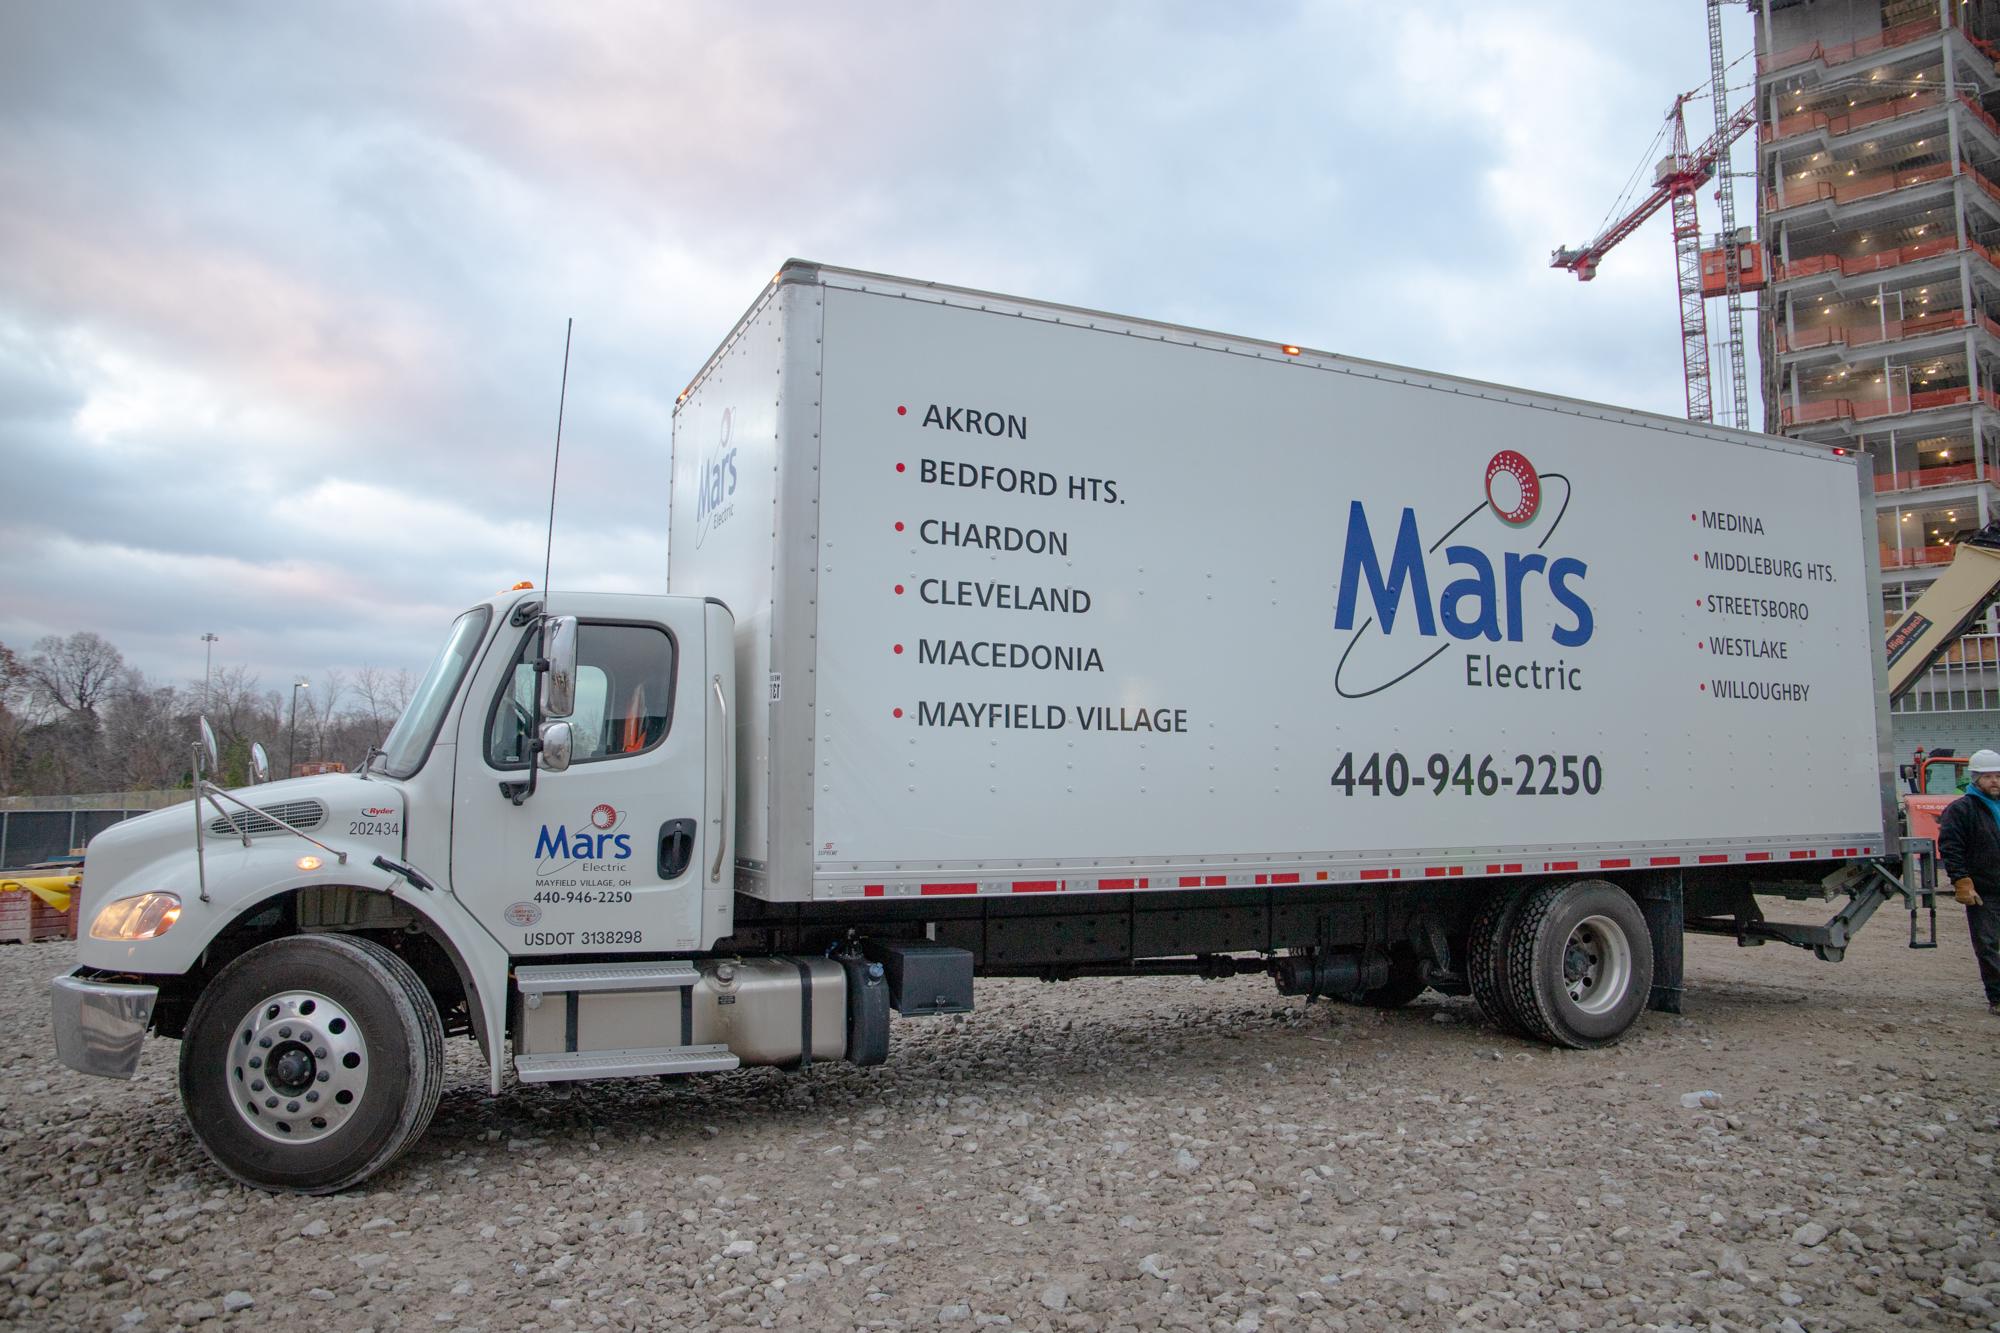 Mars Electric delivery truck parked at a construction jobsite